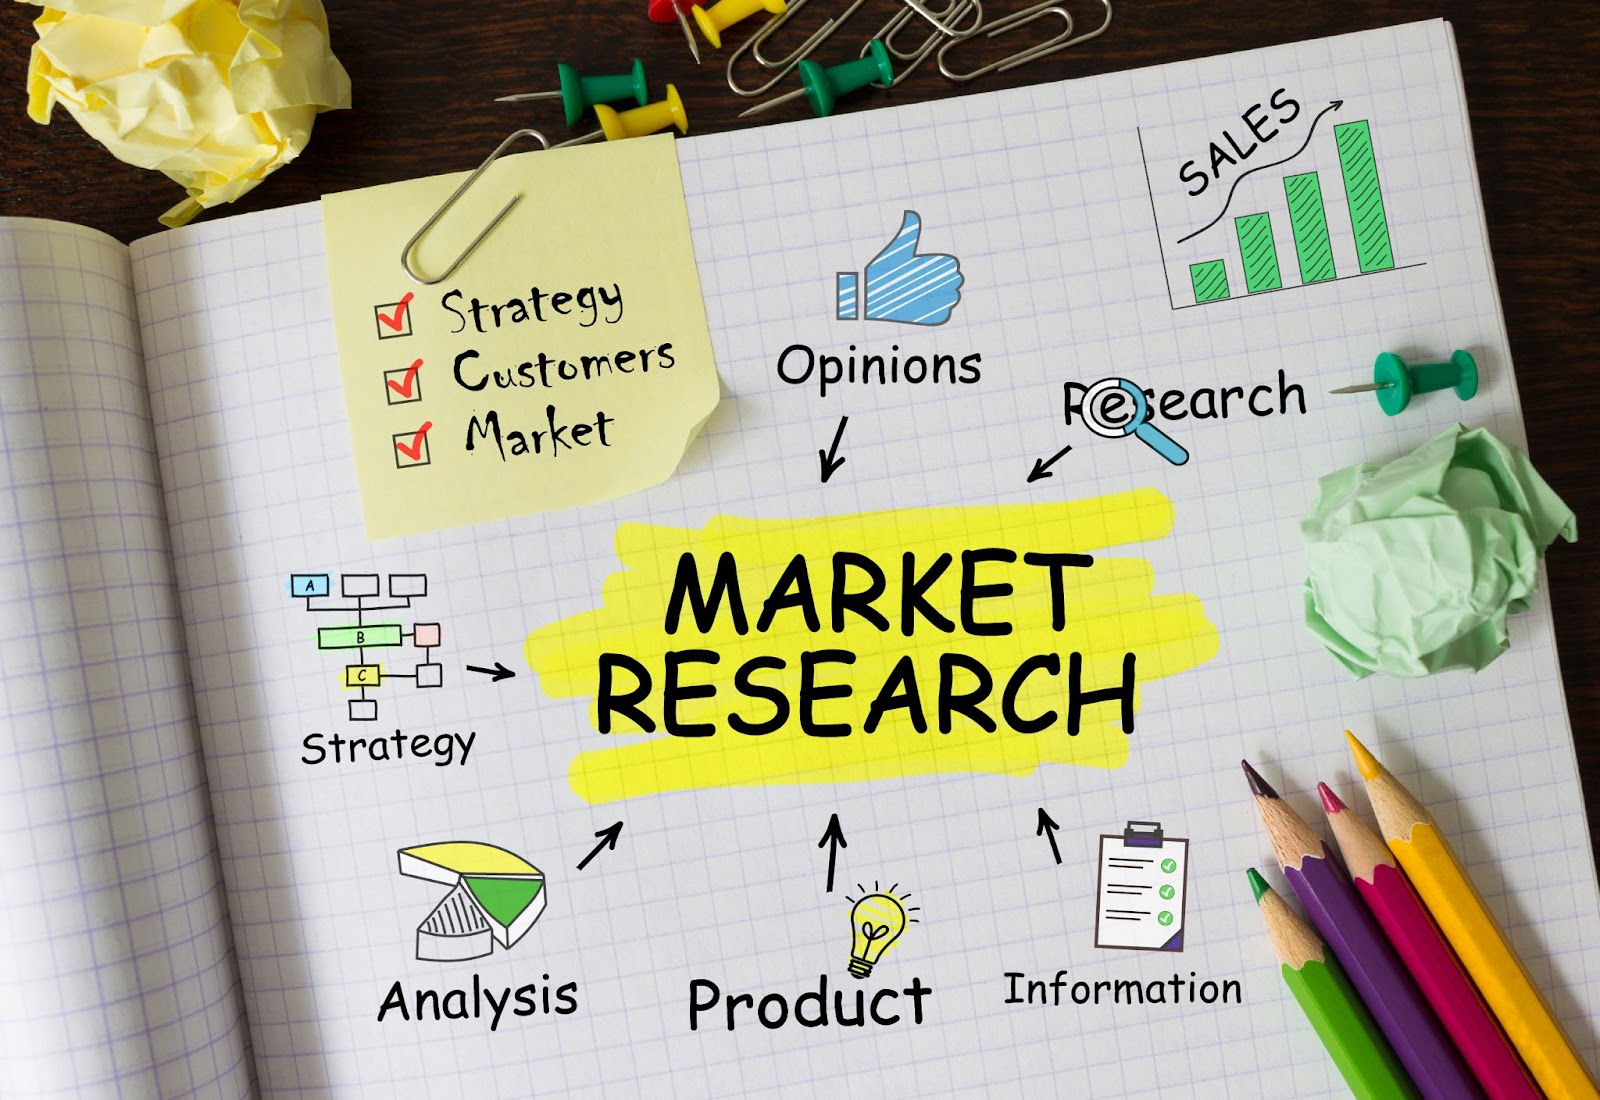 An illustration of a market research plan